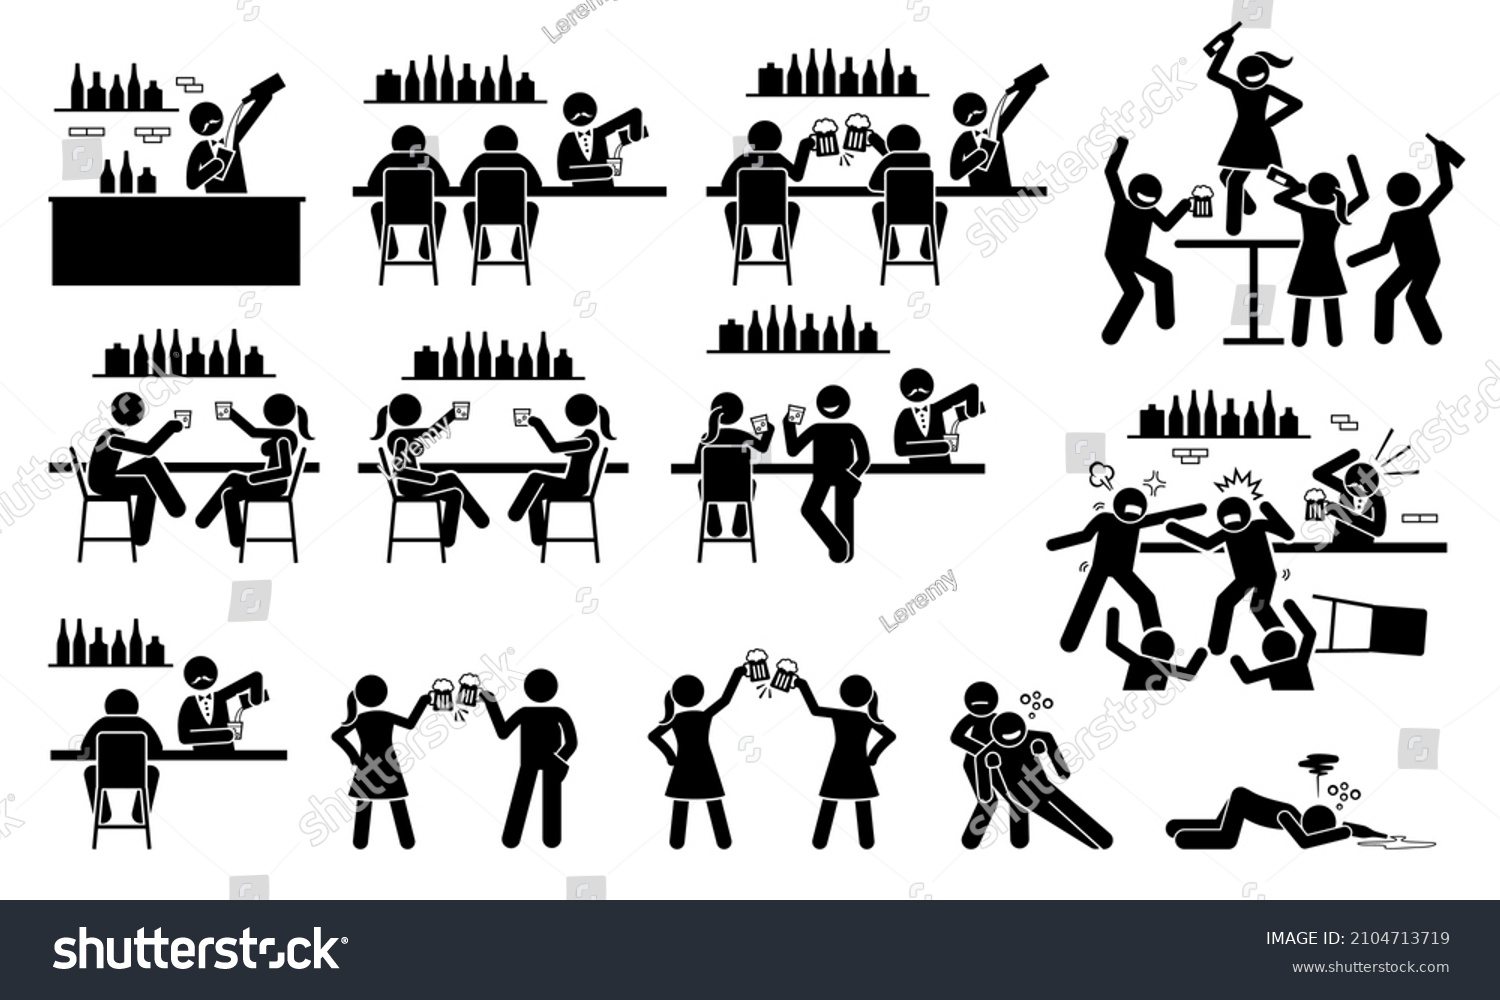 SVG of People drinking beer and wine at bar. Vector illustration stick figures of bartender, male and female friends drinking alcohol, girl dancing on table, clinking beer glass, bar fight, and drunk at bar. svg